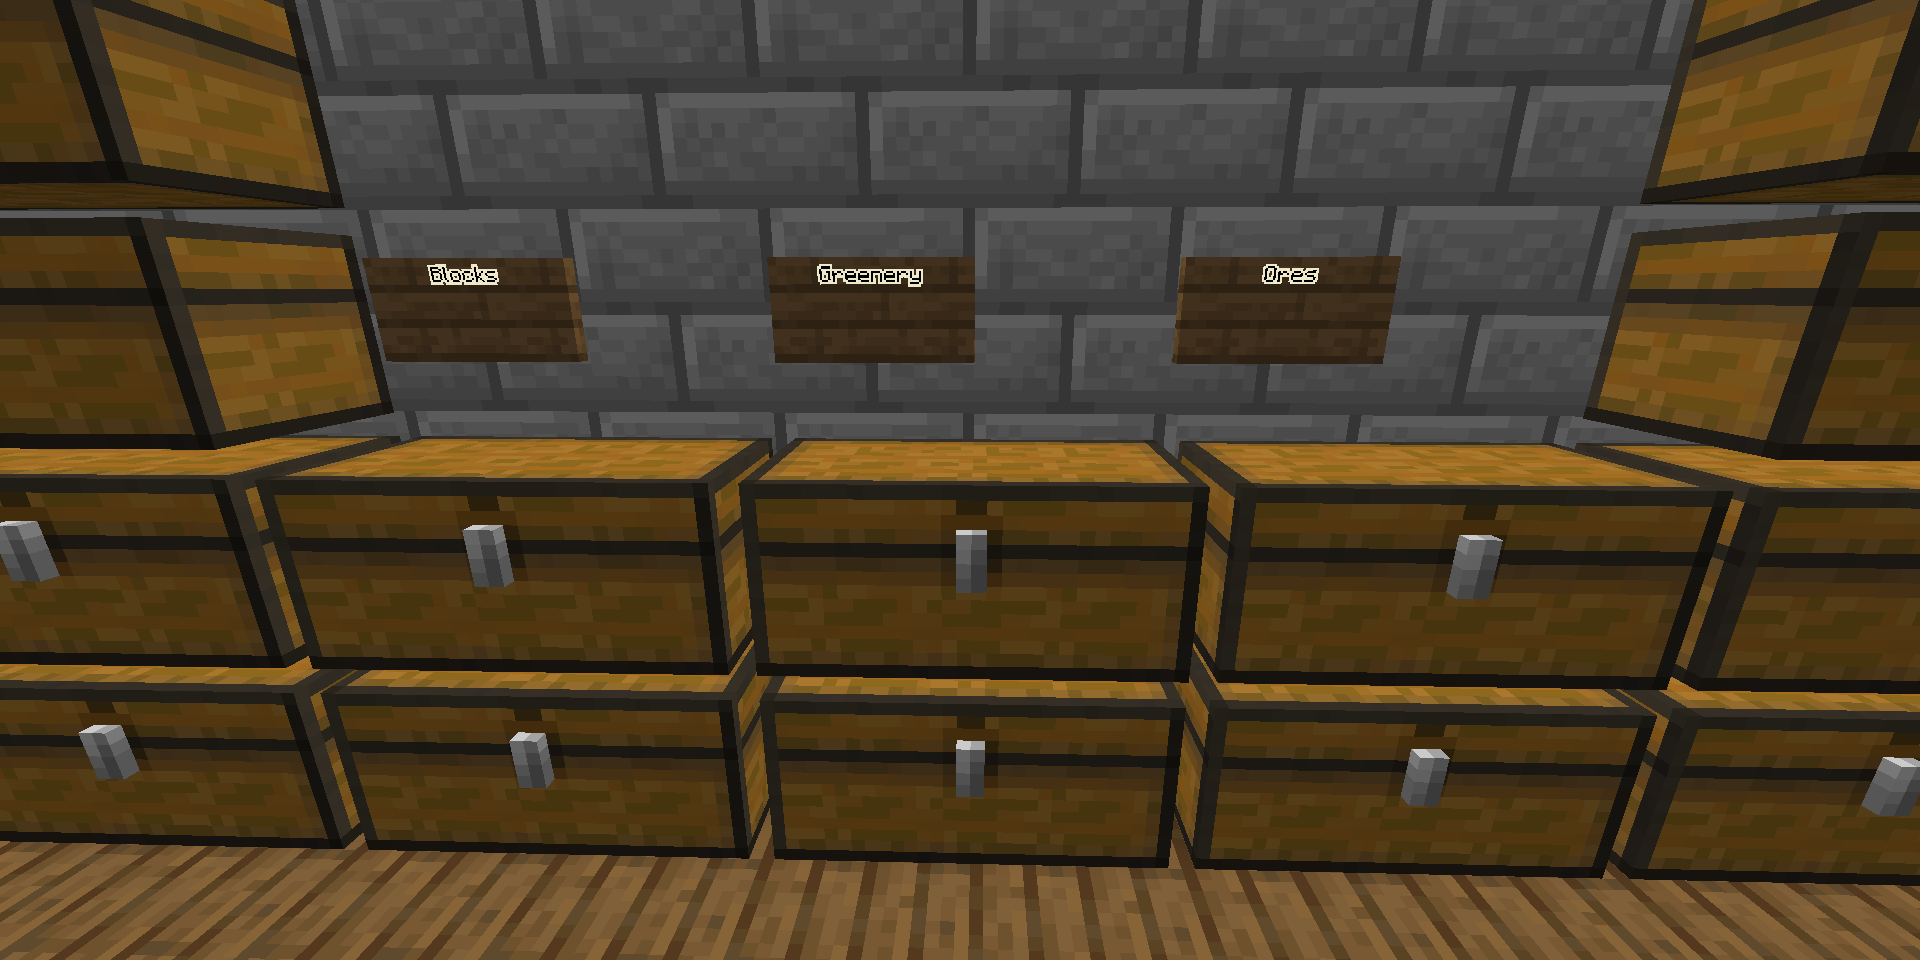 Signs that say "Blocks," "Greenery," and "Ore" above Minecraft chests